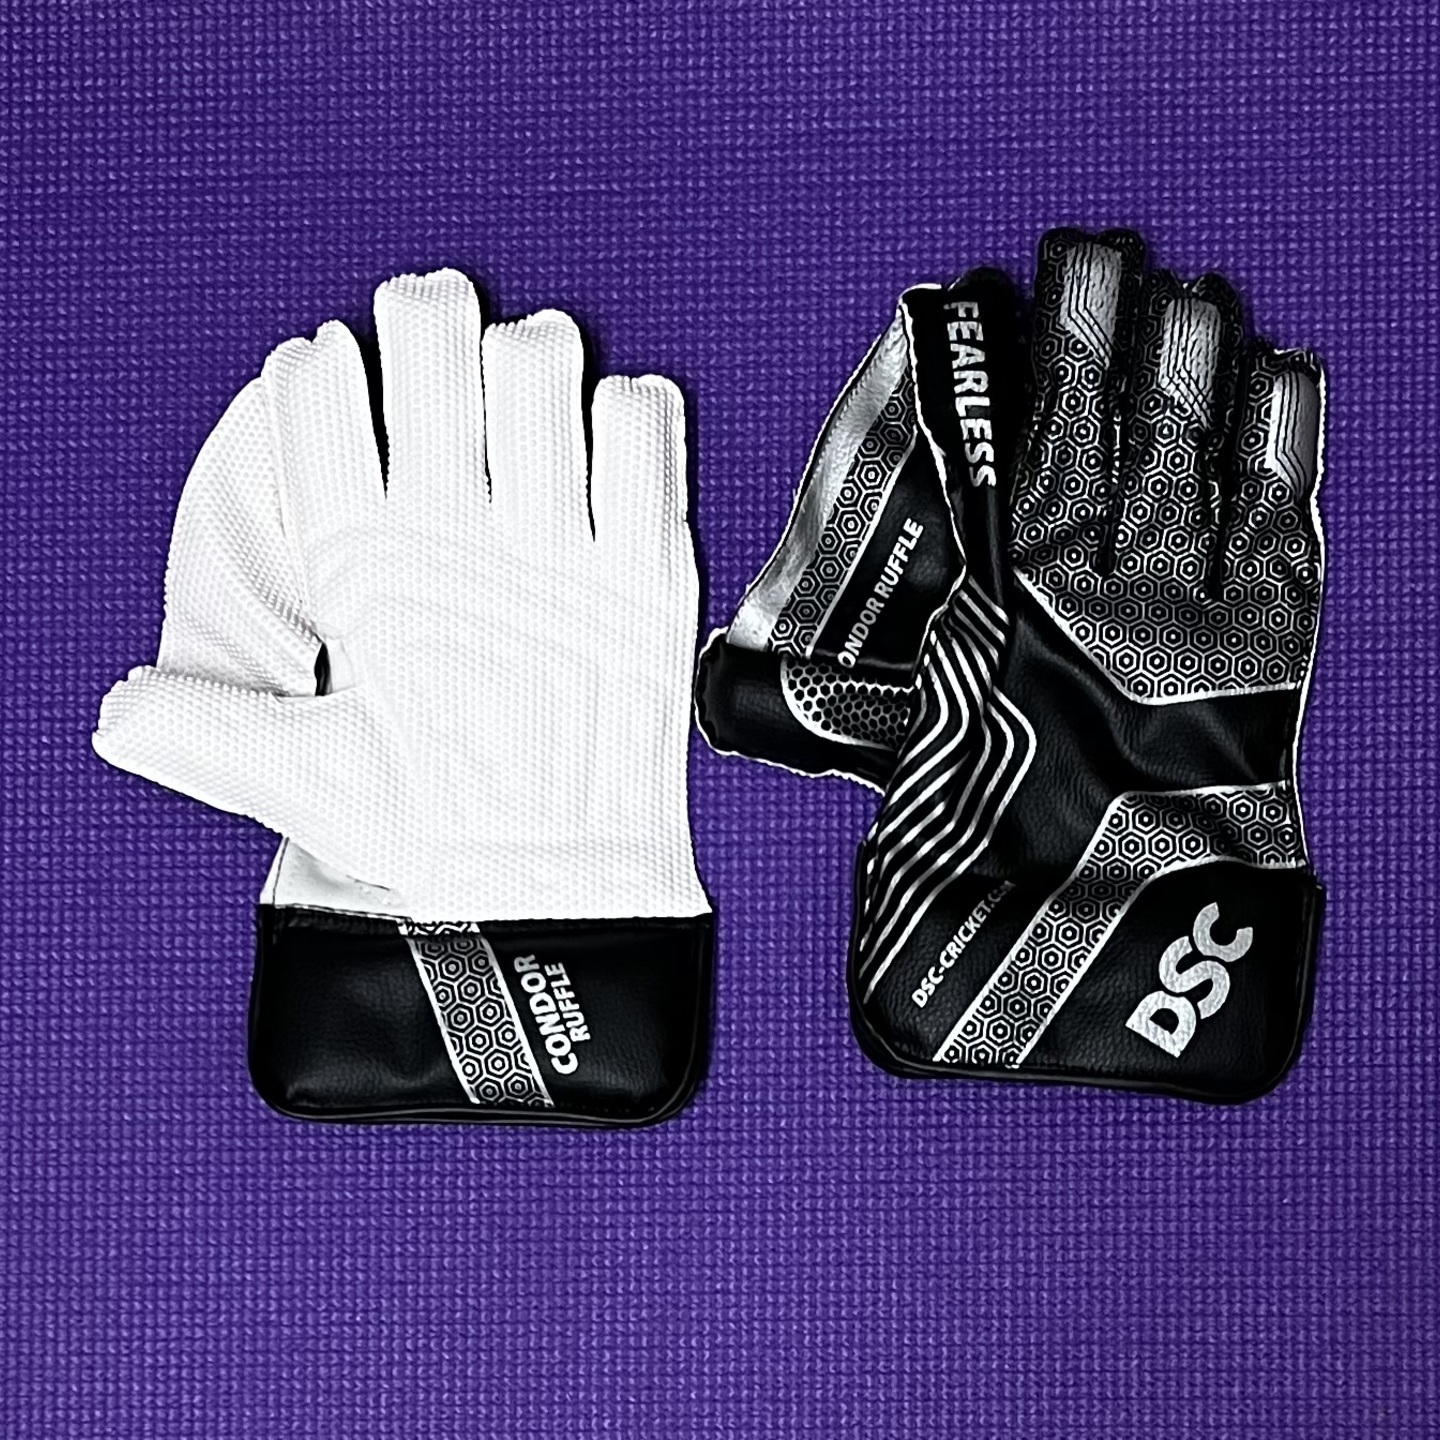 DSC CONDOR RUFFLE WICKET KEEPING GLOVES YOUTH